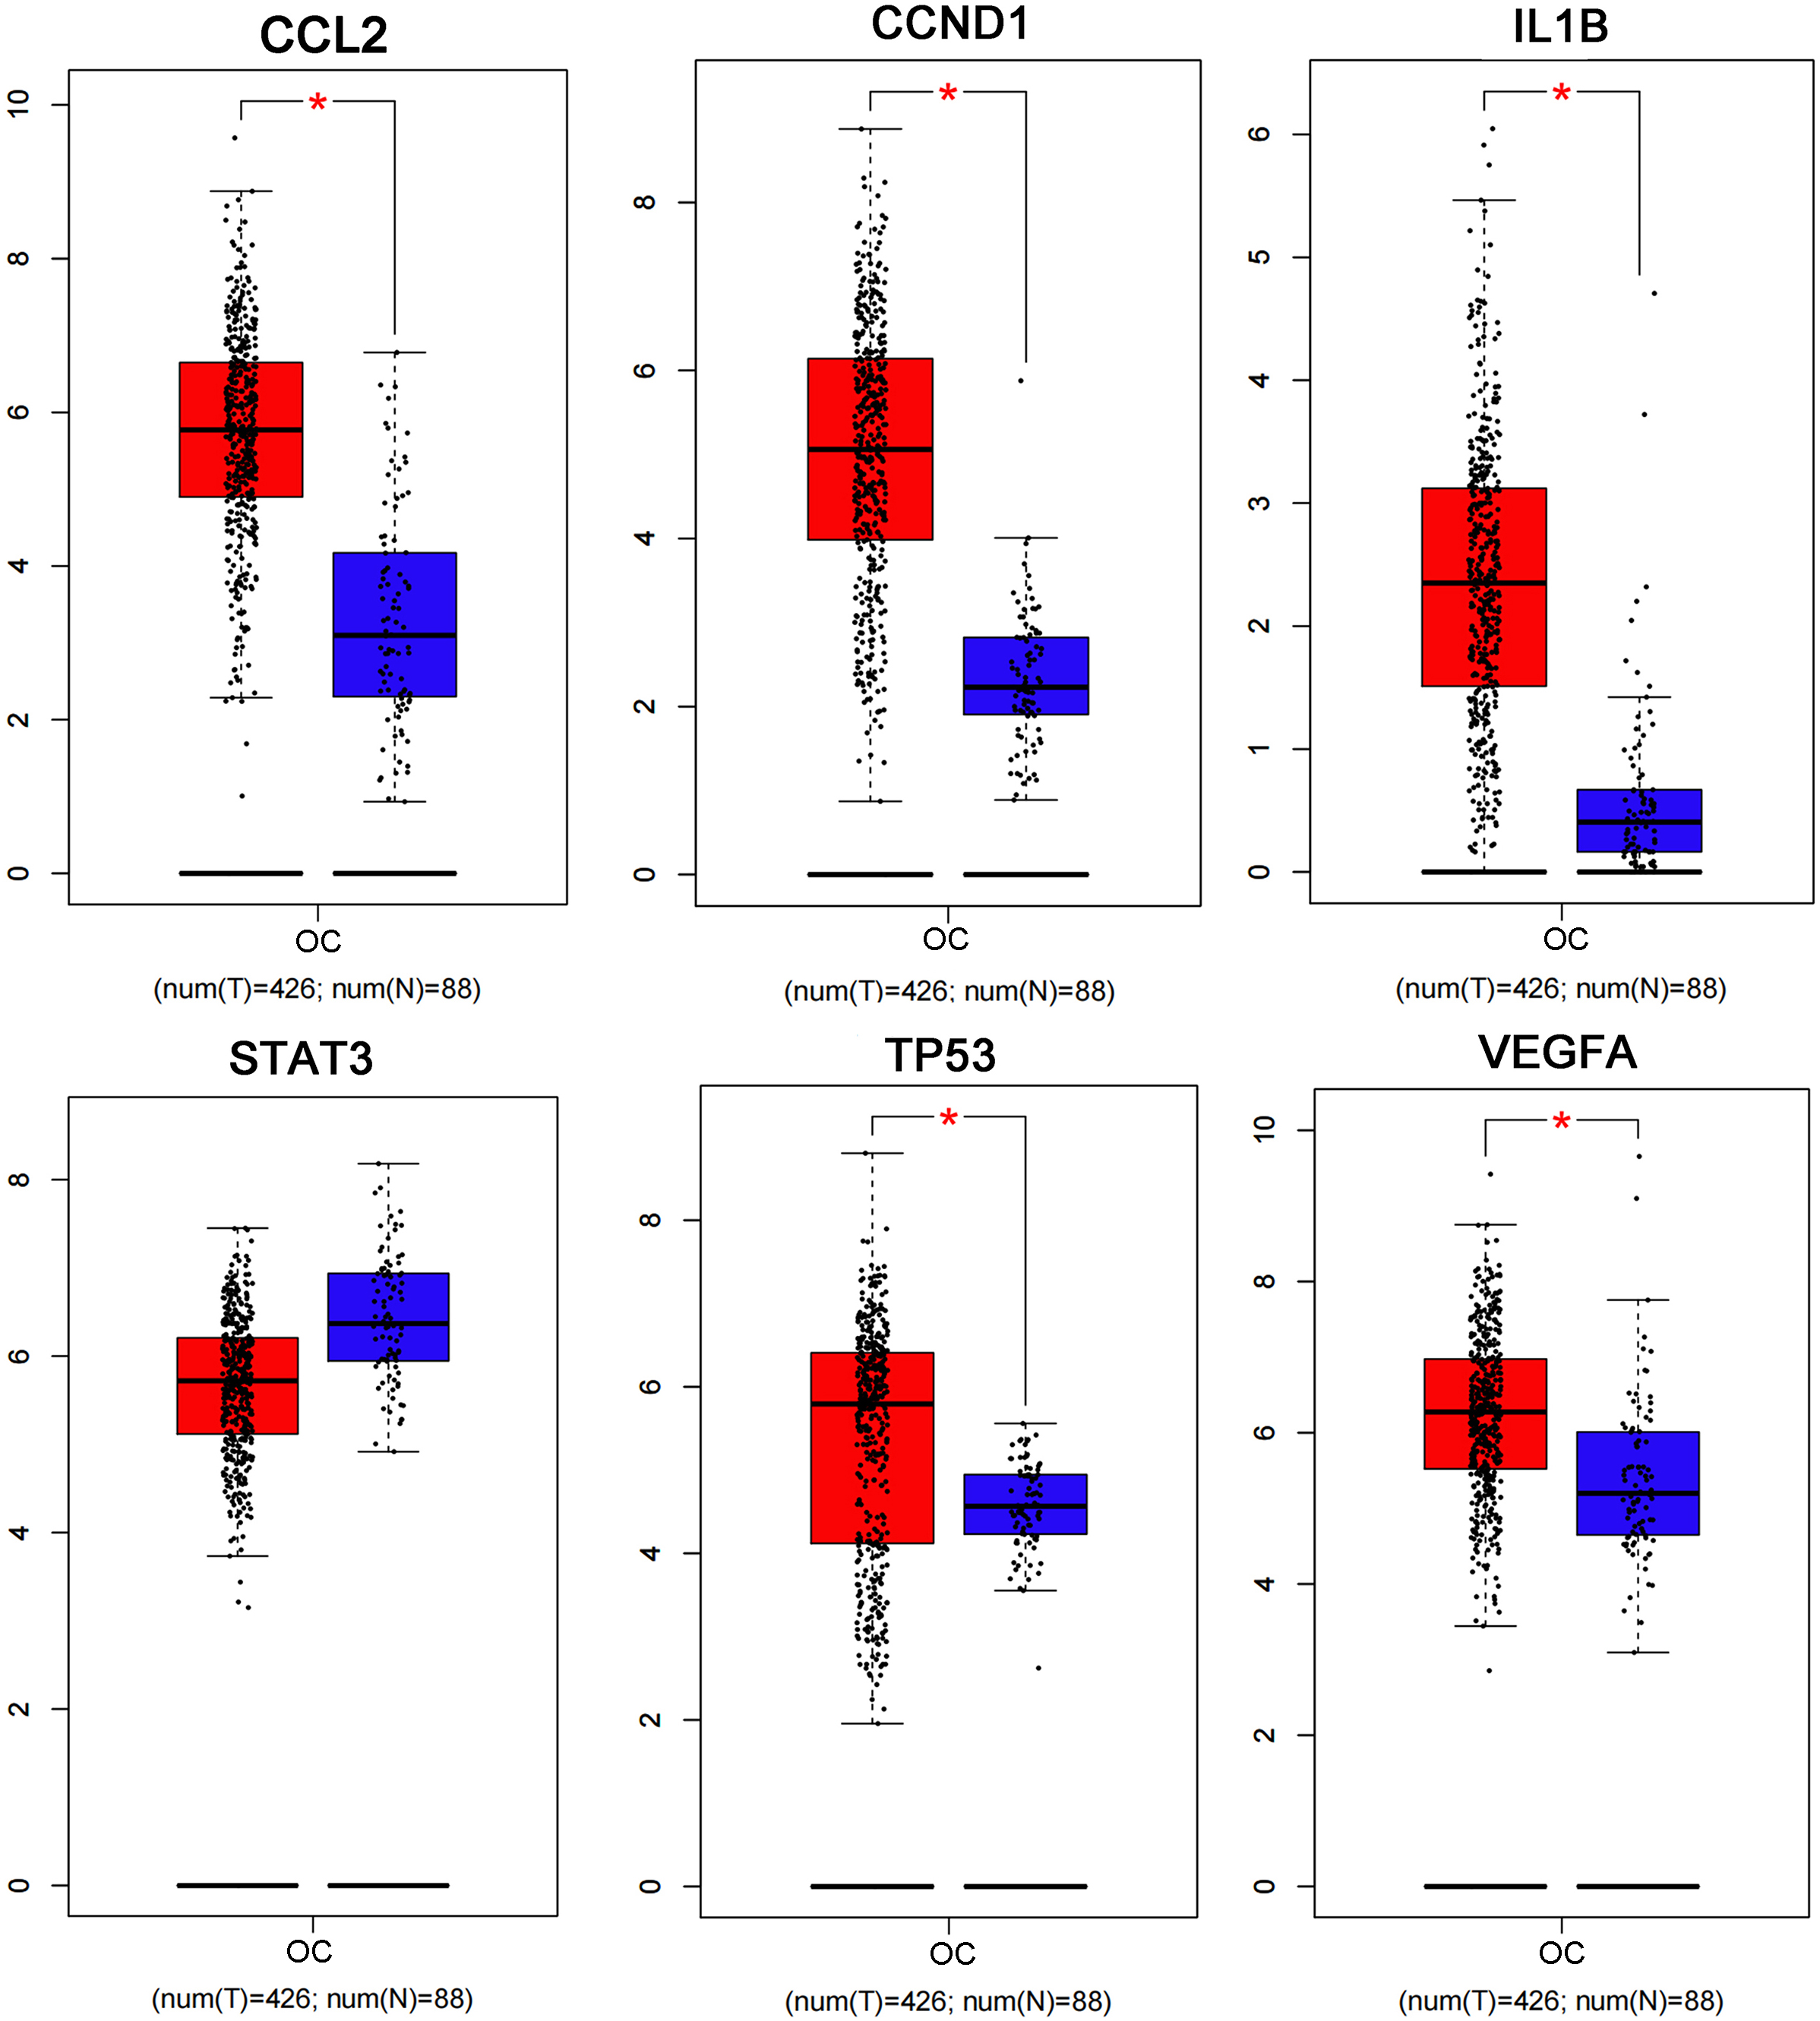 Box plots show the expression levels of CCL2, CCND1, IL1B, STAT3, TP53, and VEGFA between OC cases and controls based on the GEPIA database. Red indicates OC samples, while blue indicates normal samples. OC: ovarian cancer. * P < 0.05.